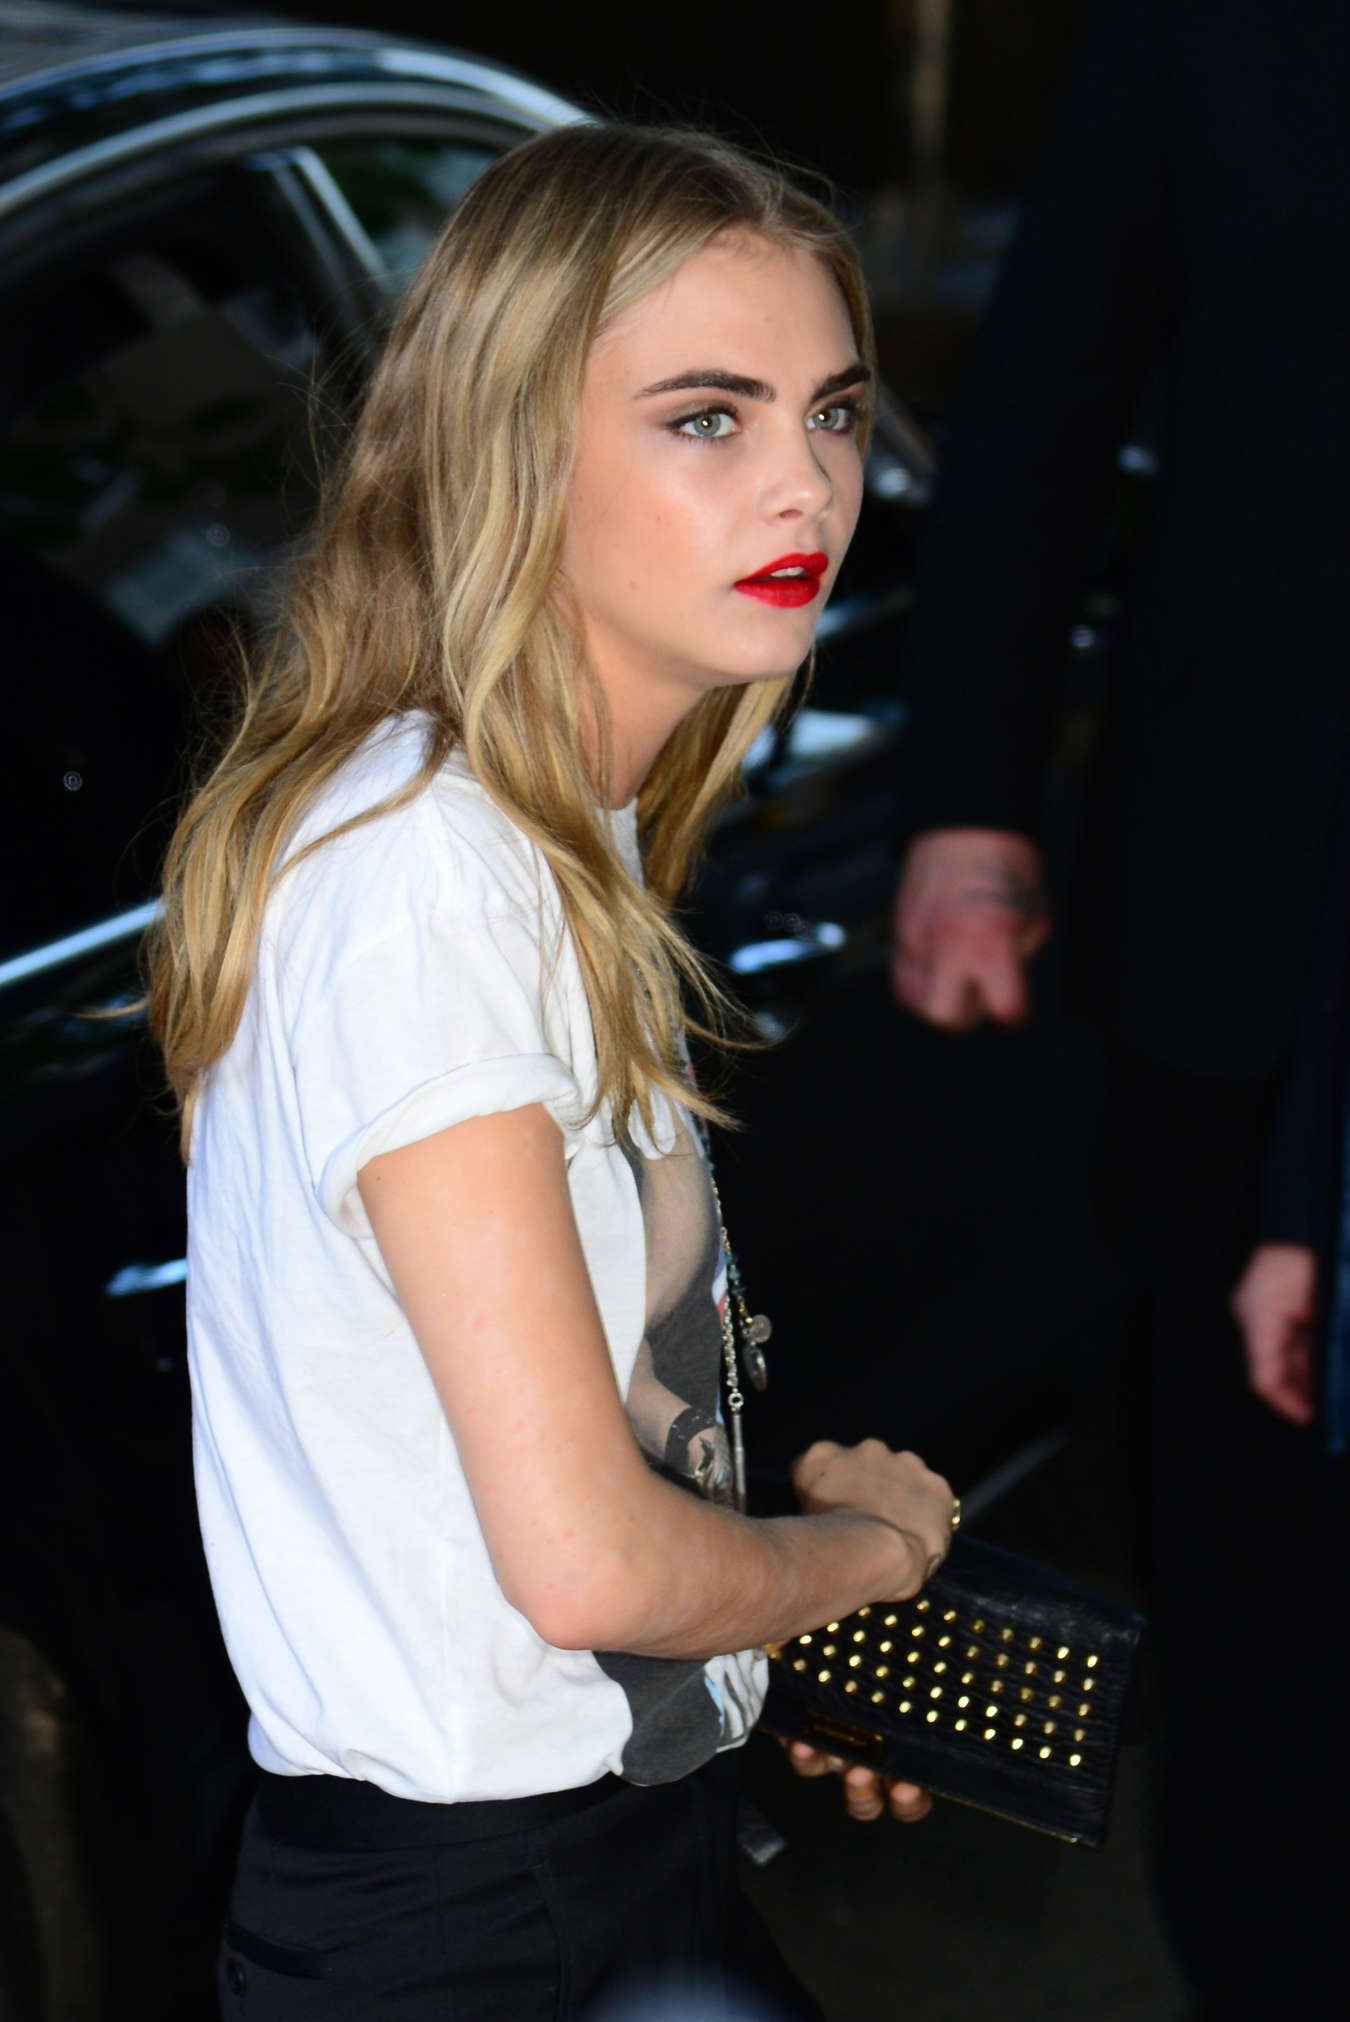 Cara Delevingne at 2013 Glamour Women Of The Year Awards -17 | GotCeleb